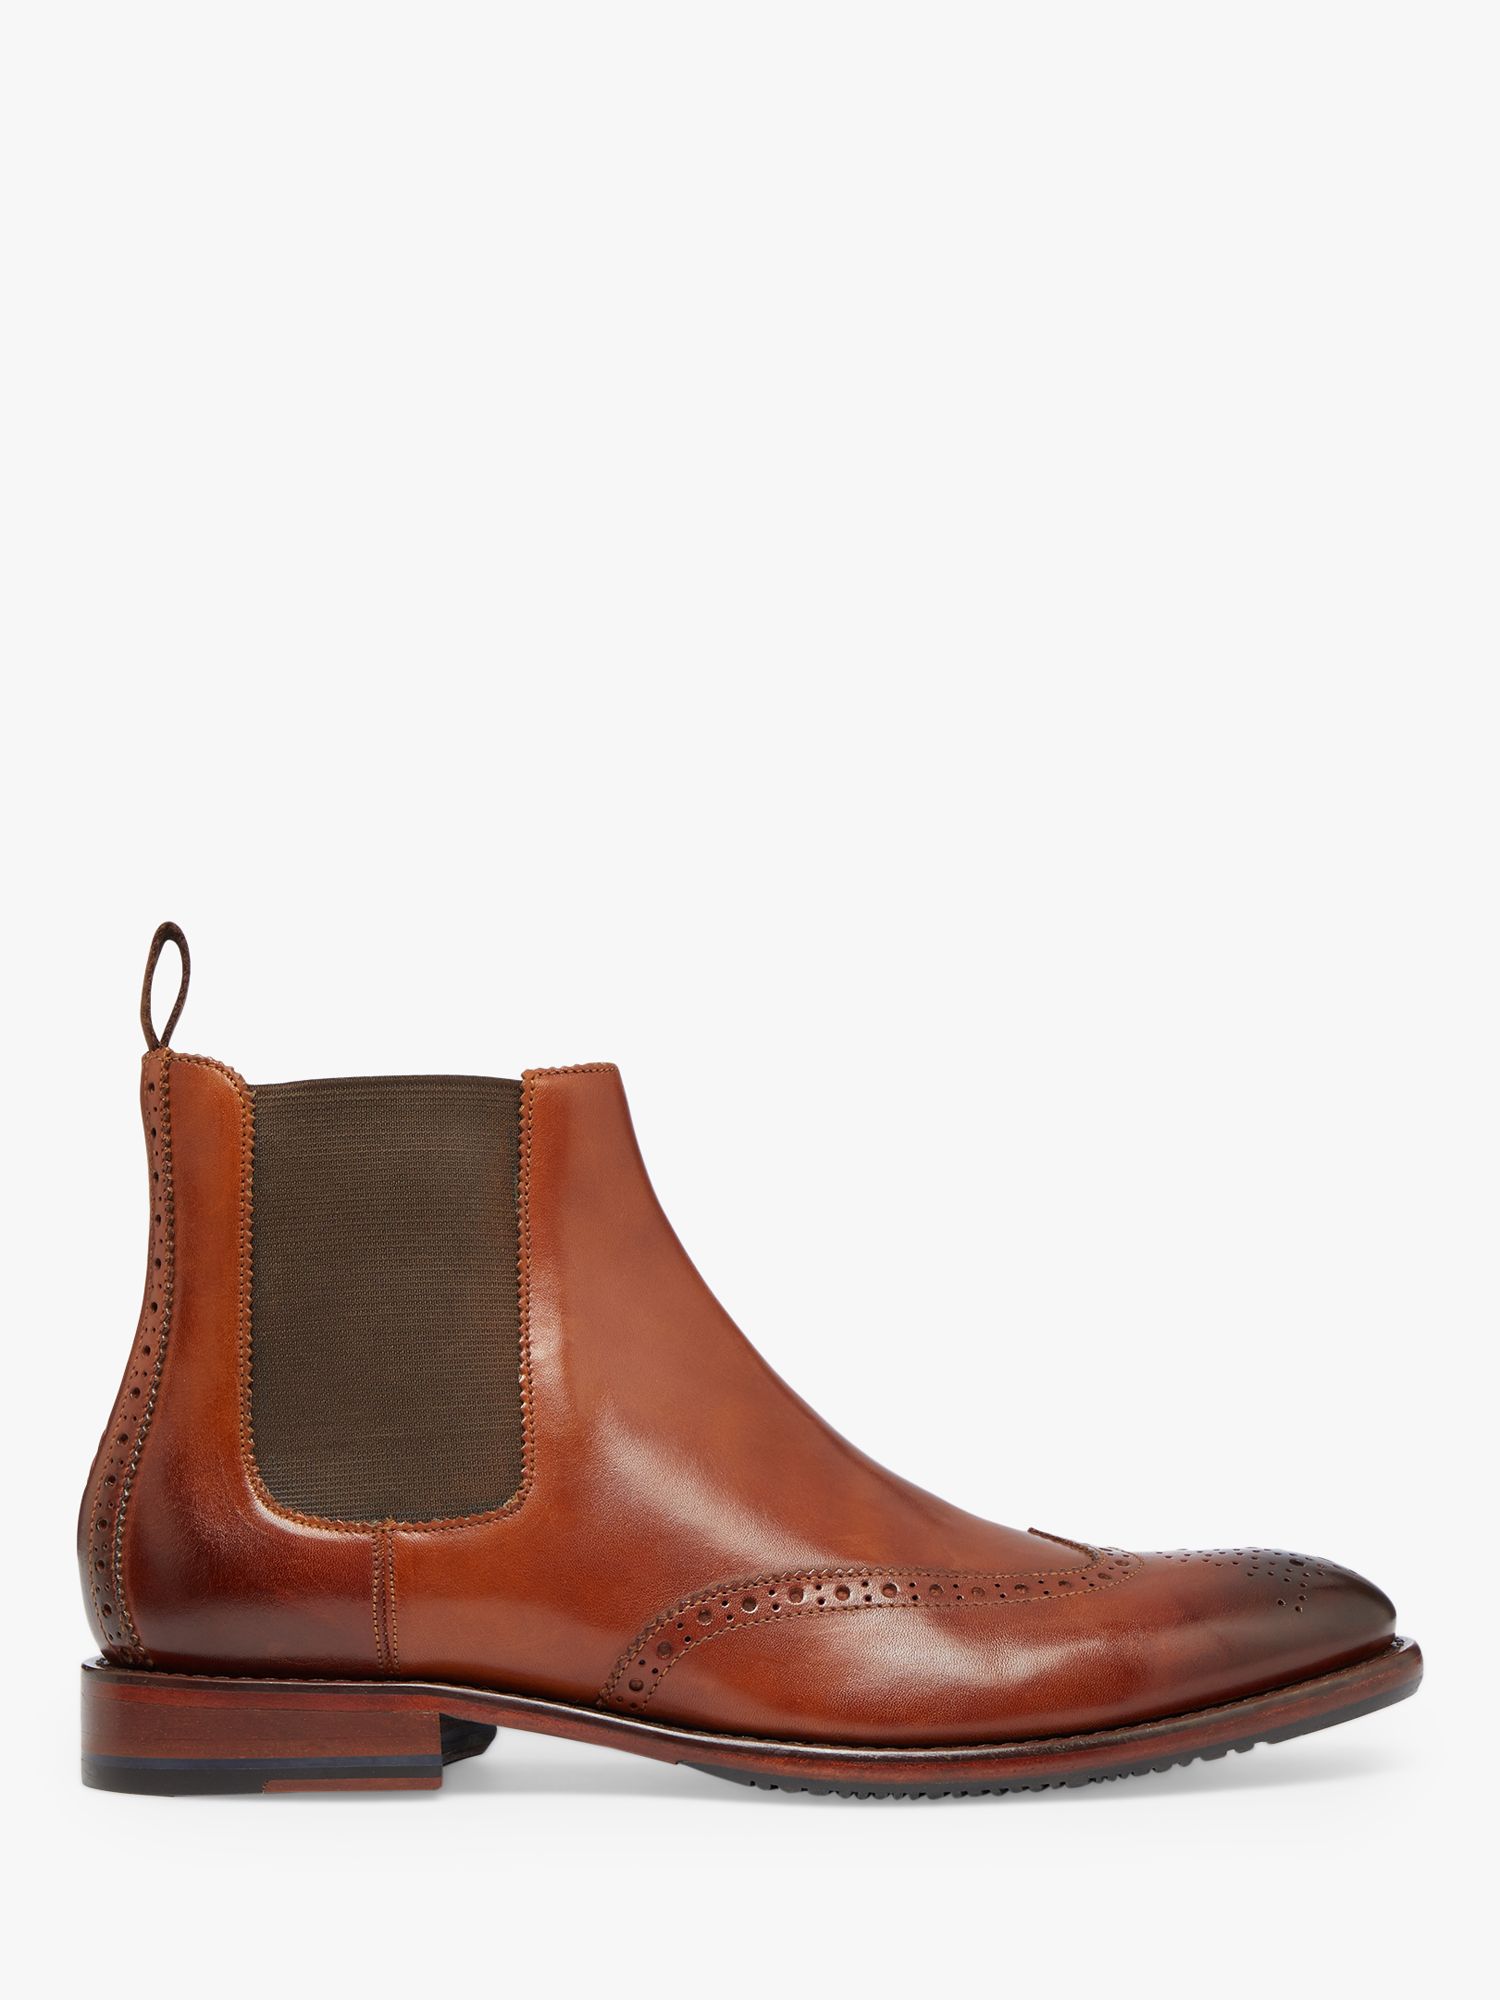 Oliver Sweeney Portrush Antiqued Leather Chelsea Boots, Tan at John ...